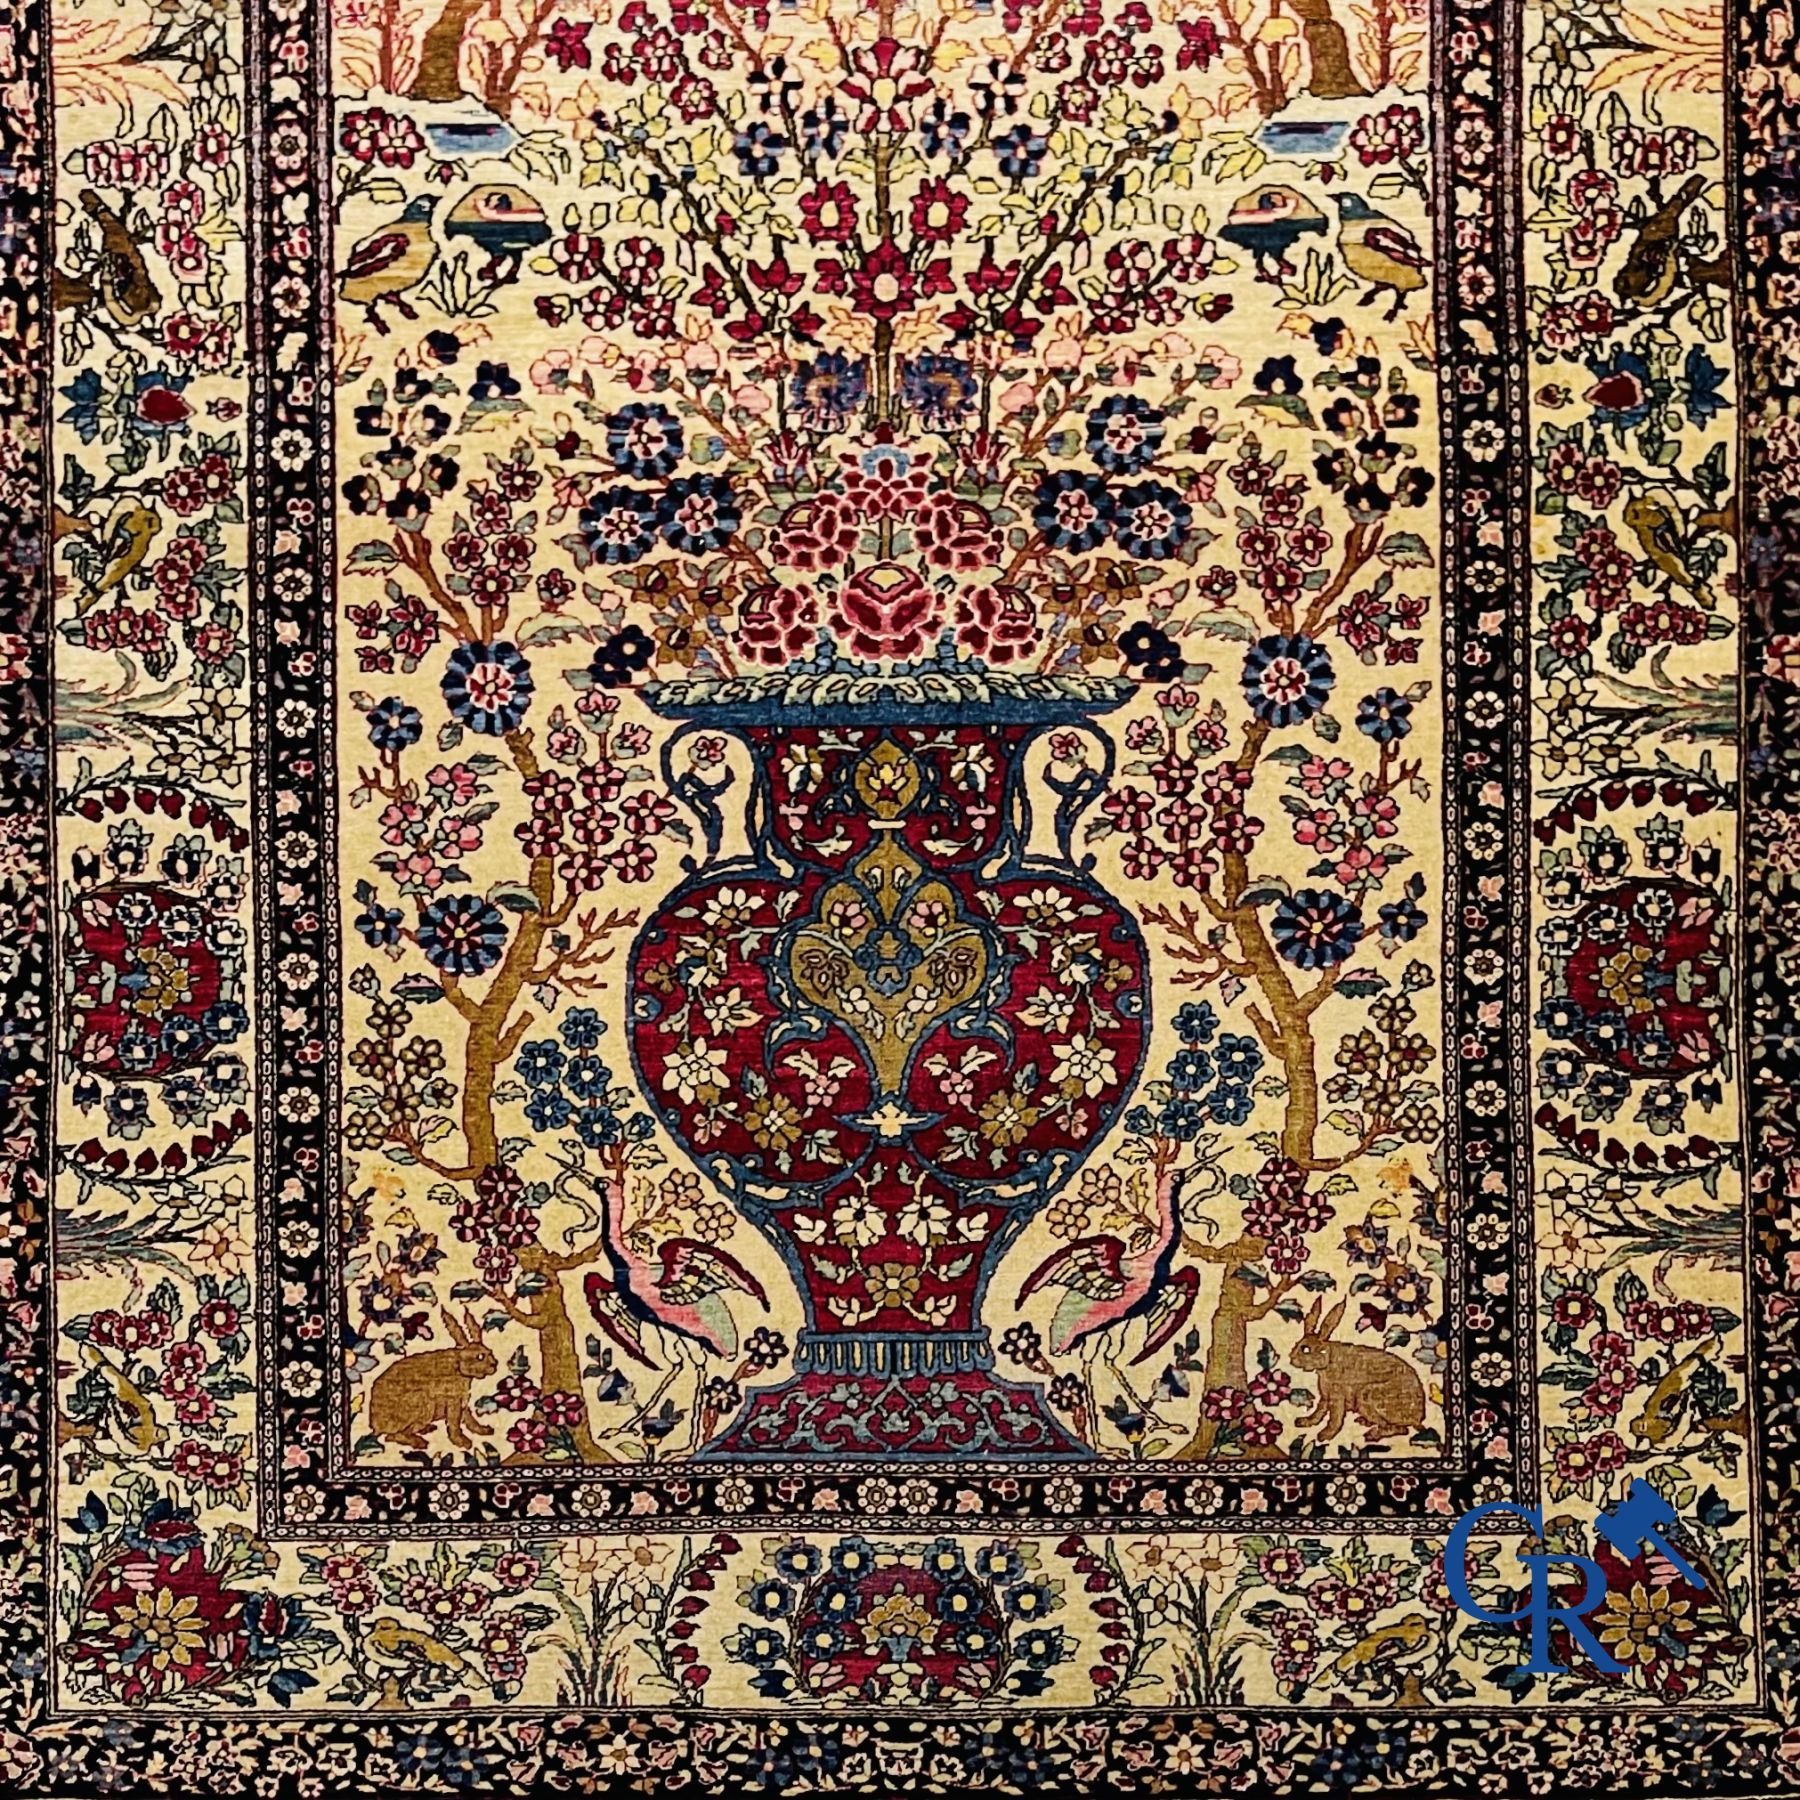 Oriental carpets. Iran. Persian carpet with a flower vase, birds and rabbits in a floral decor.